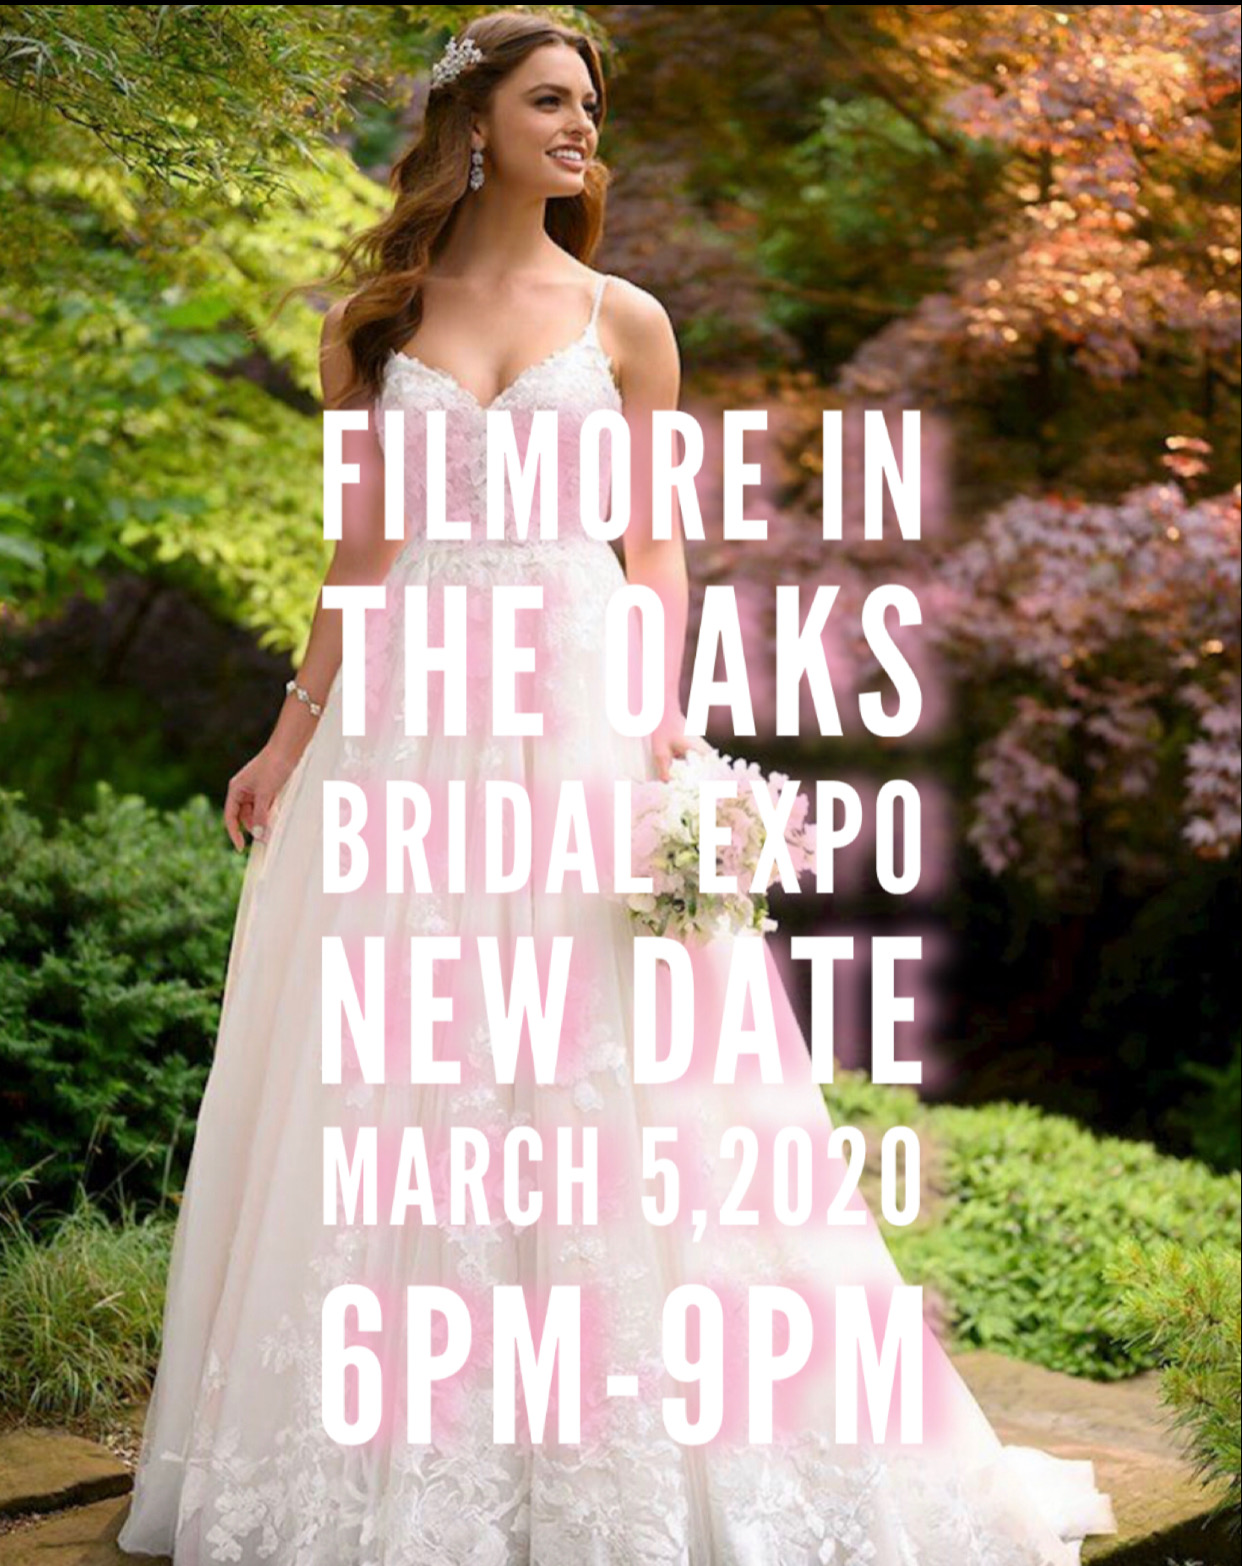 Filmore in the Oaks Bridal Expo Rescheduled Date 3/5/2020